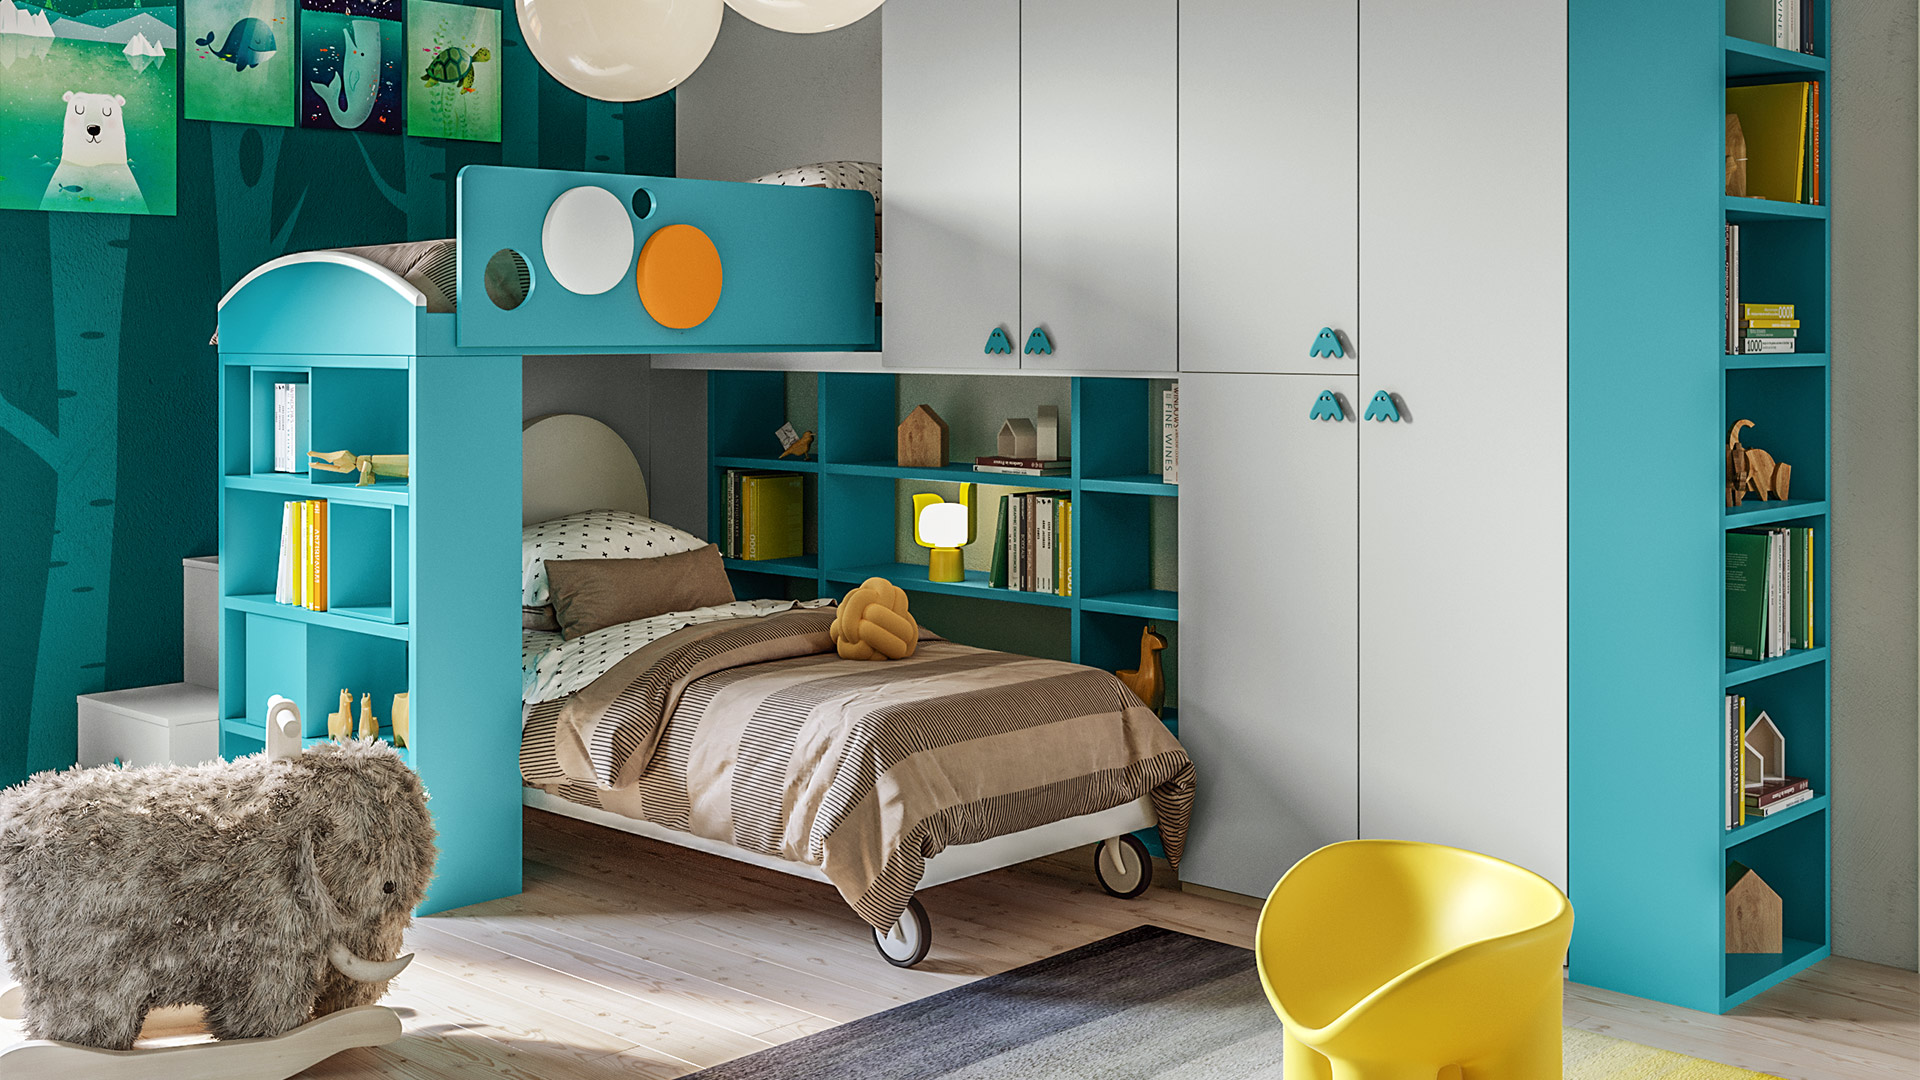 The bunk bed, the solution to optimize the space in the bedroom